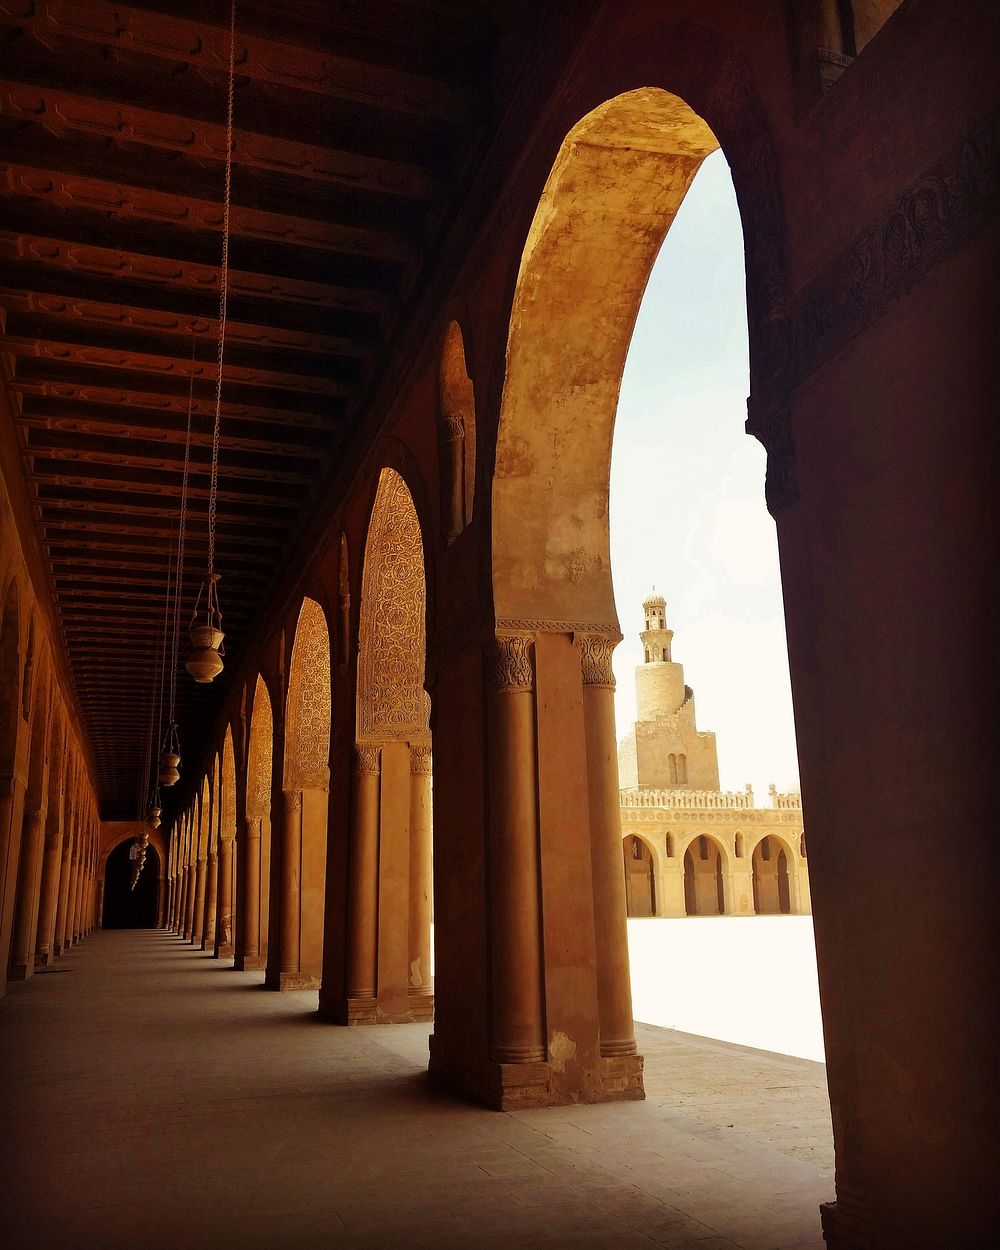 Mosque of Ibn Tulun in Cairo, free public domain CC0 image.